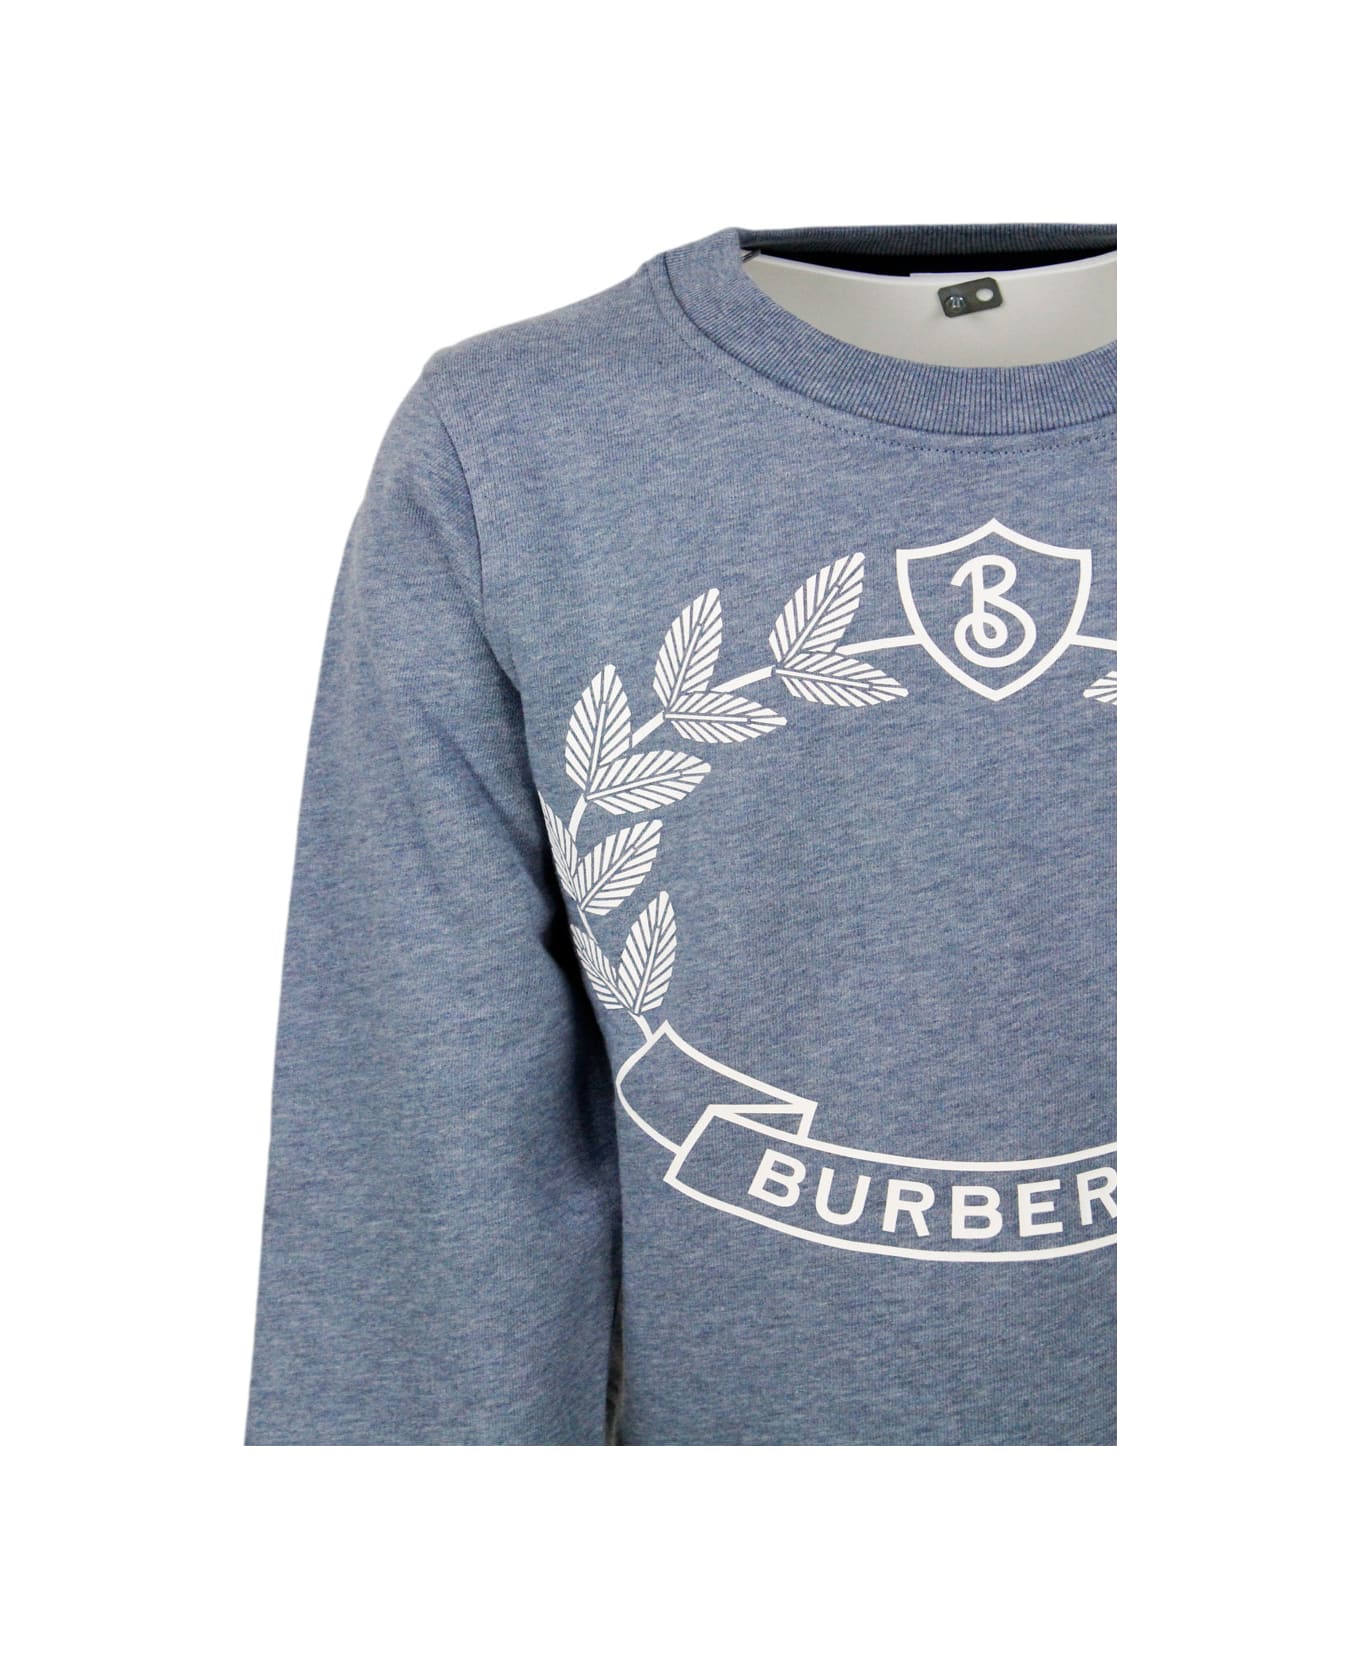 Burberry Crewneck Sweatshirt In Cotton Jersey With White Logo Print On The Front - Light Blu